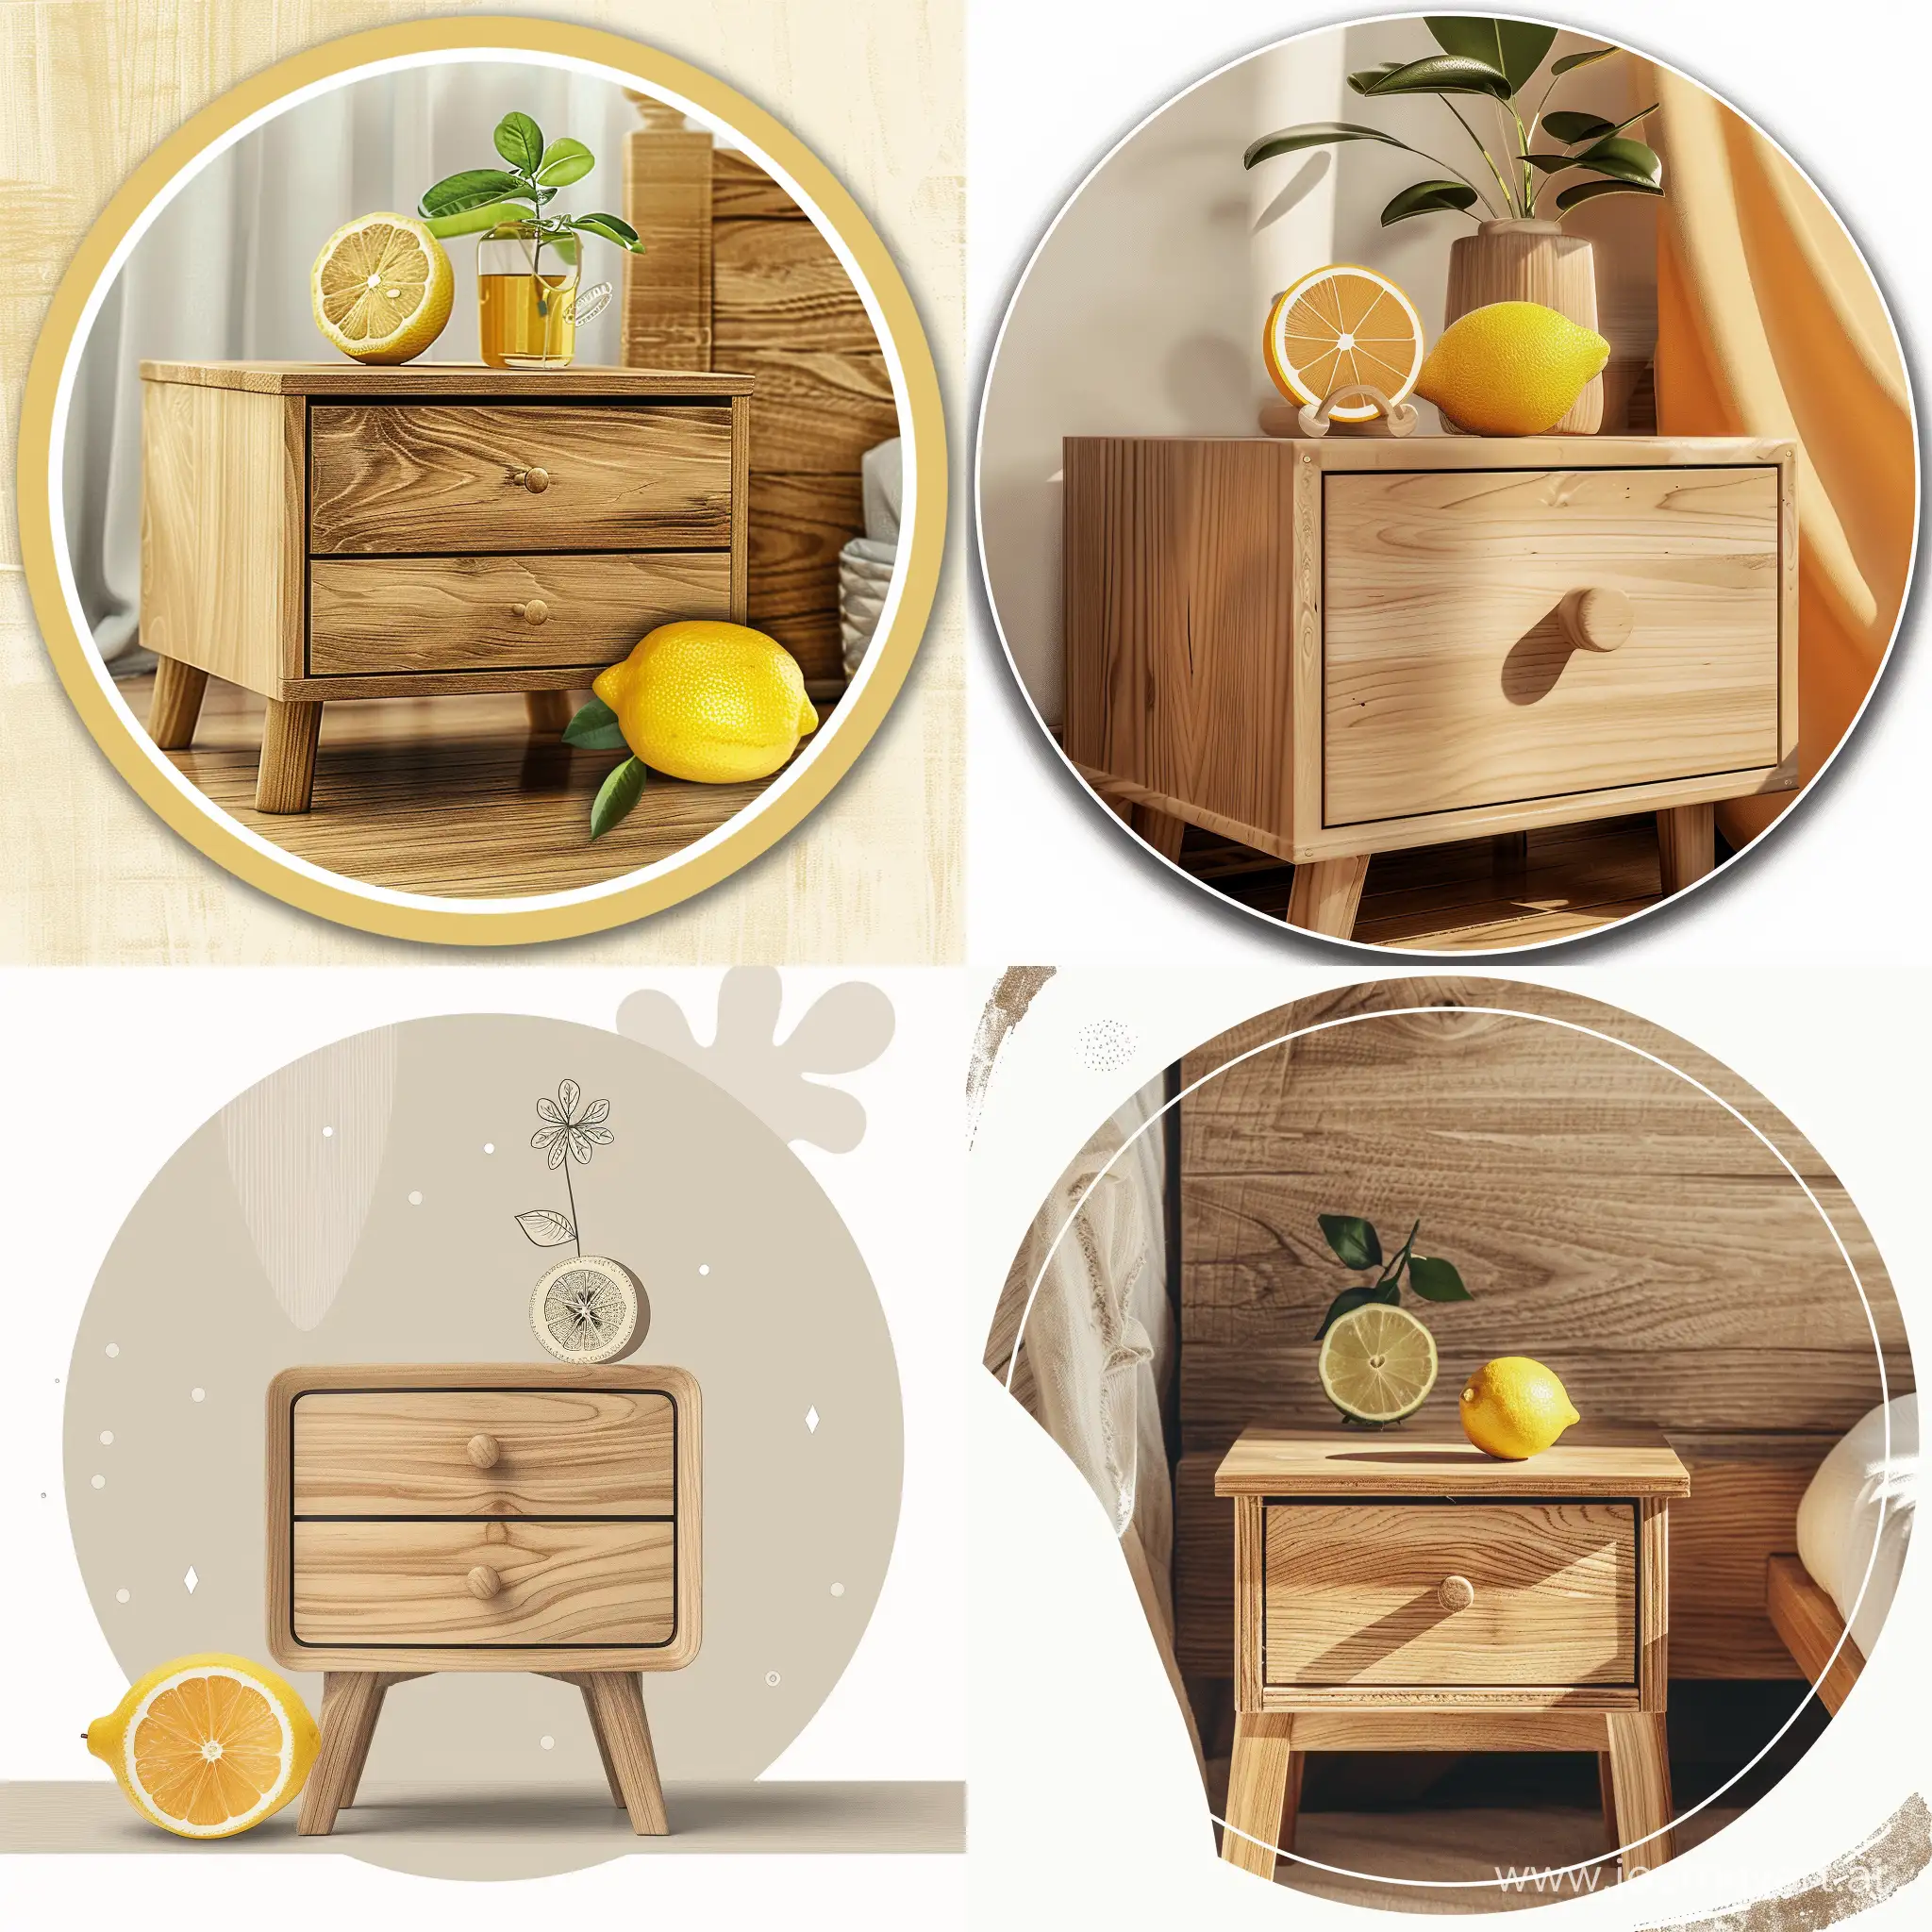 Rustic-Wooden-Bedside-Table-and-Lemon-Logo-for-Furniture-Store